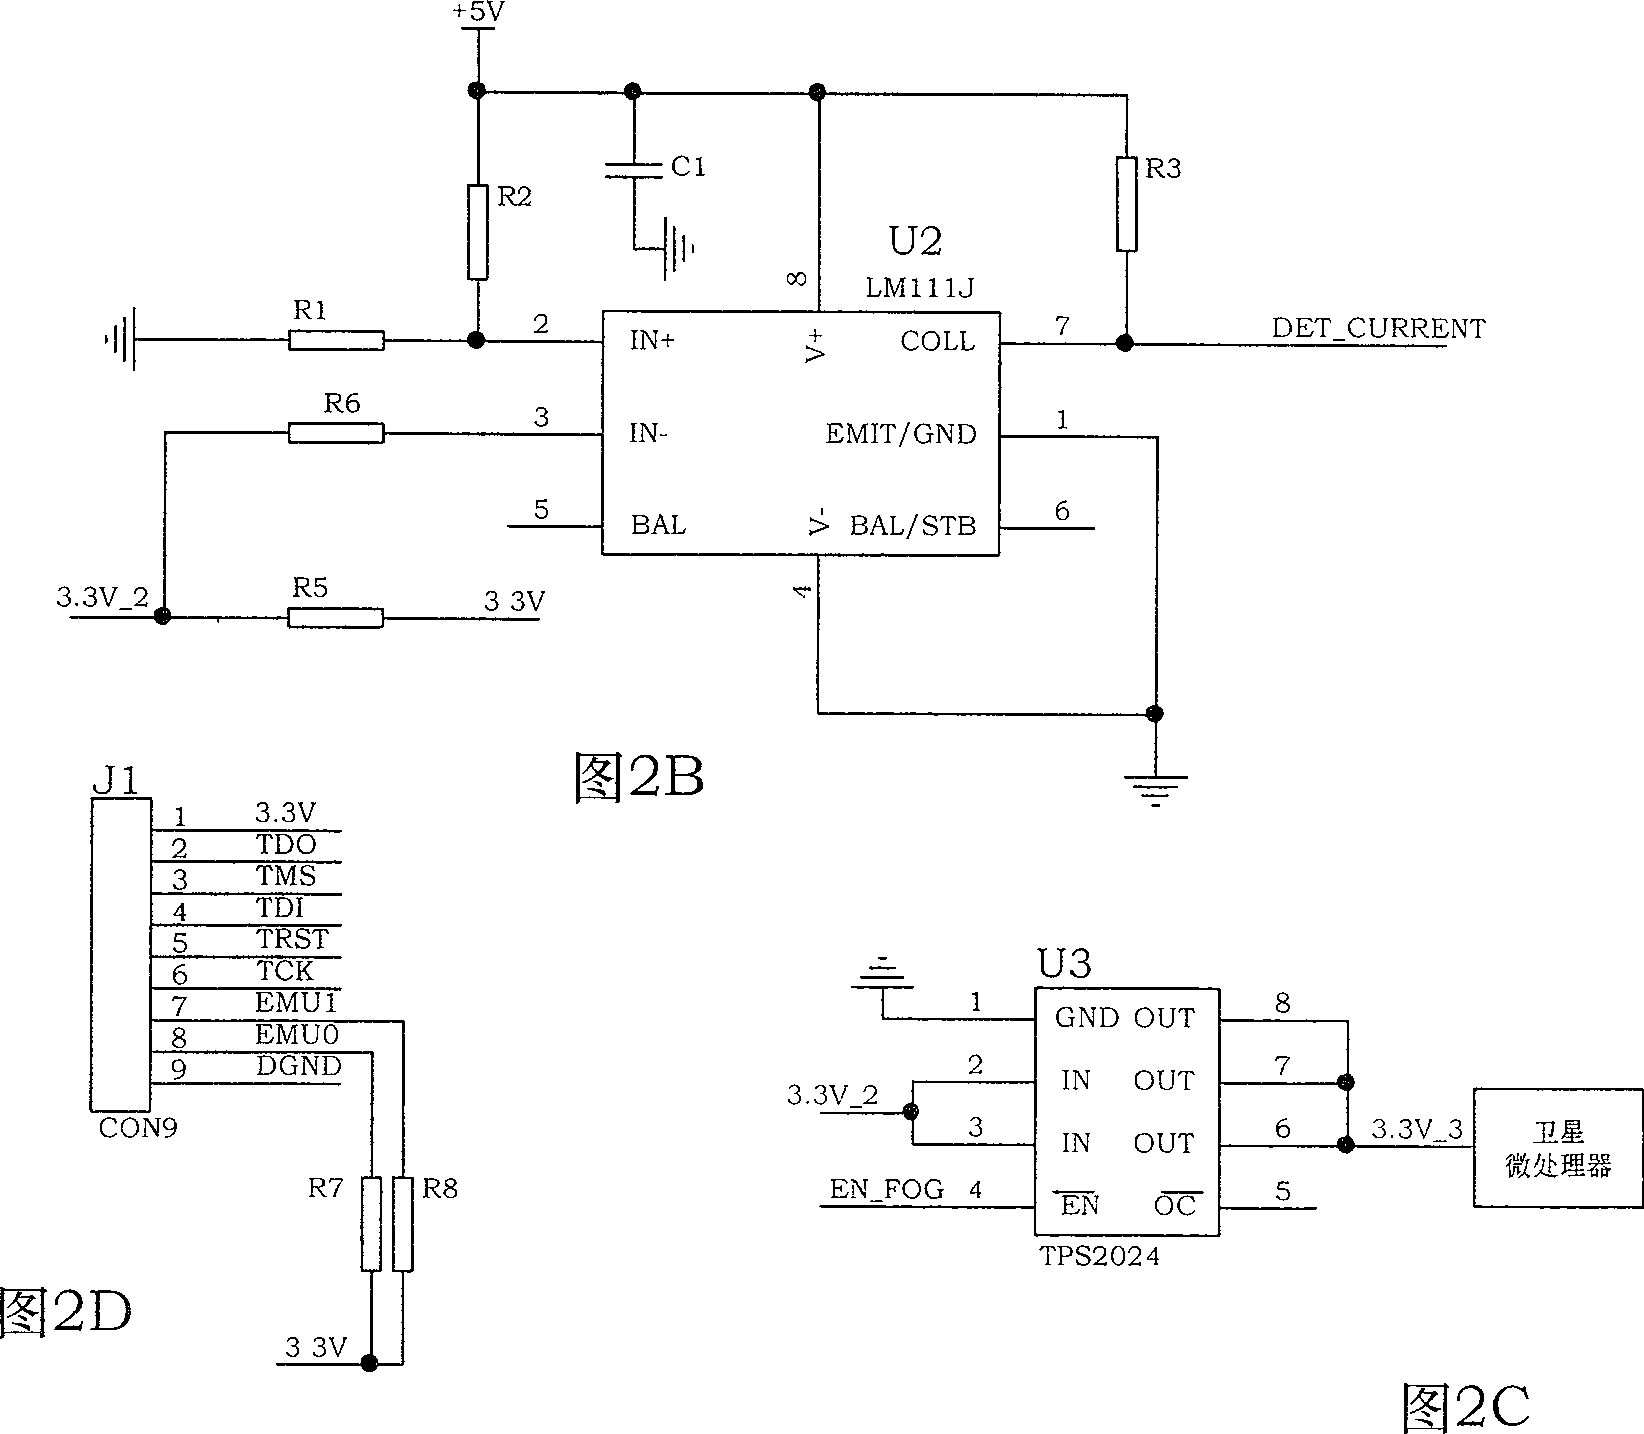 Latch fault detection circuit suitable for satellite microprocessor